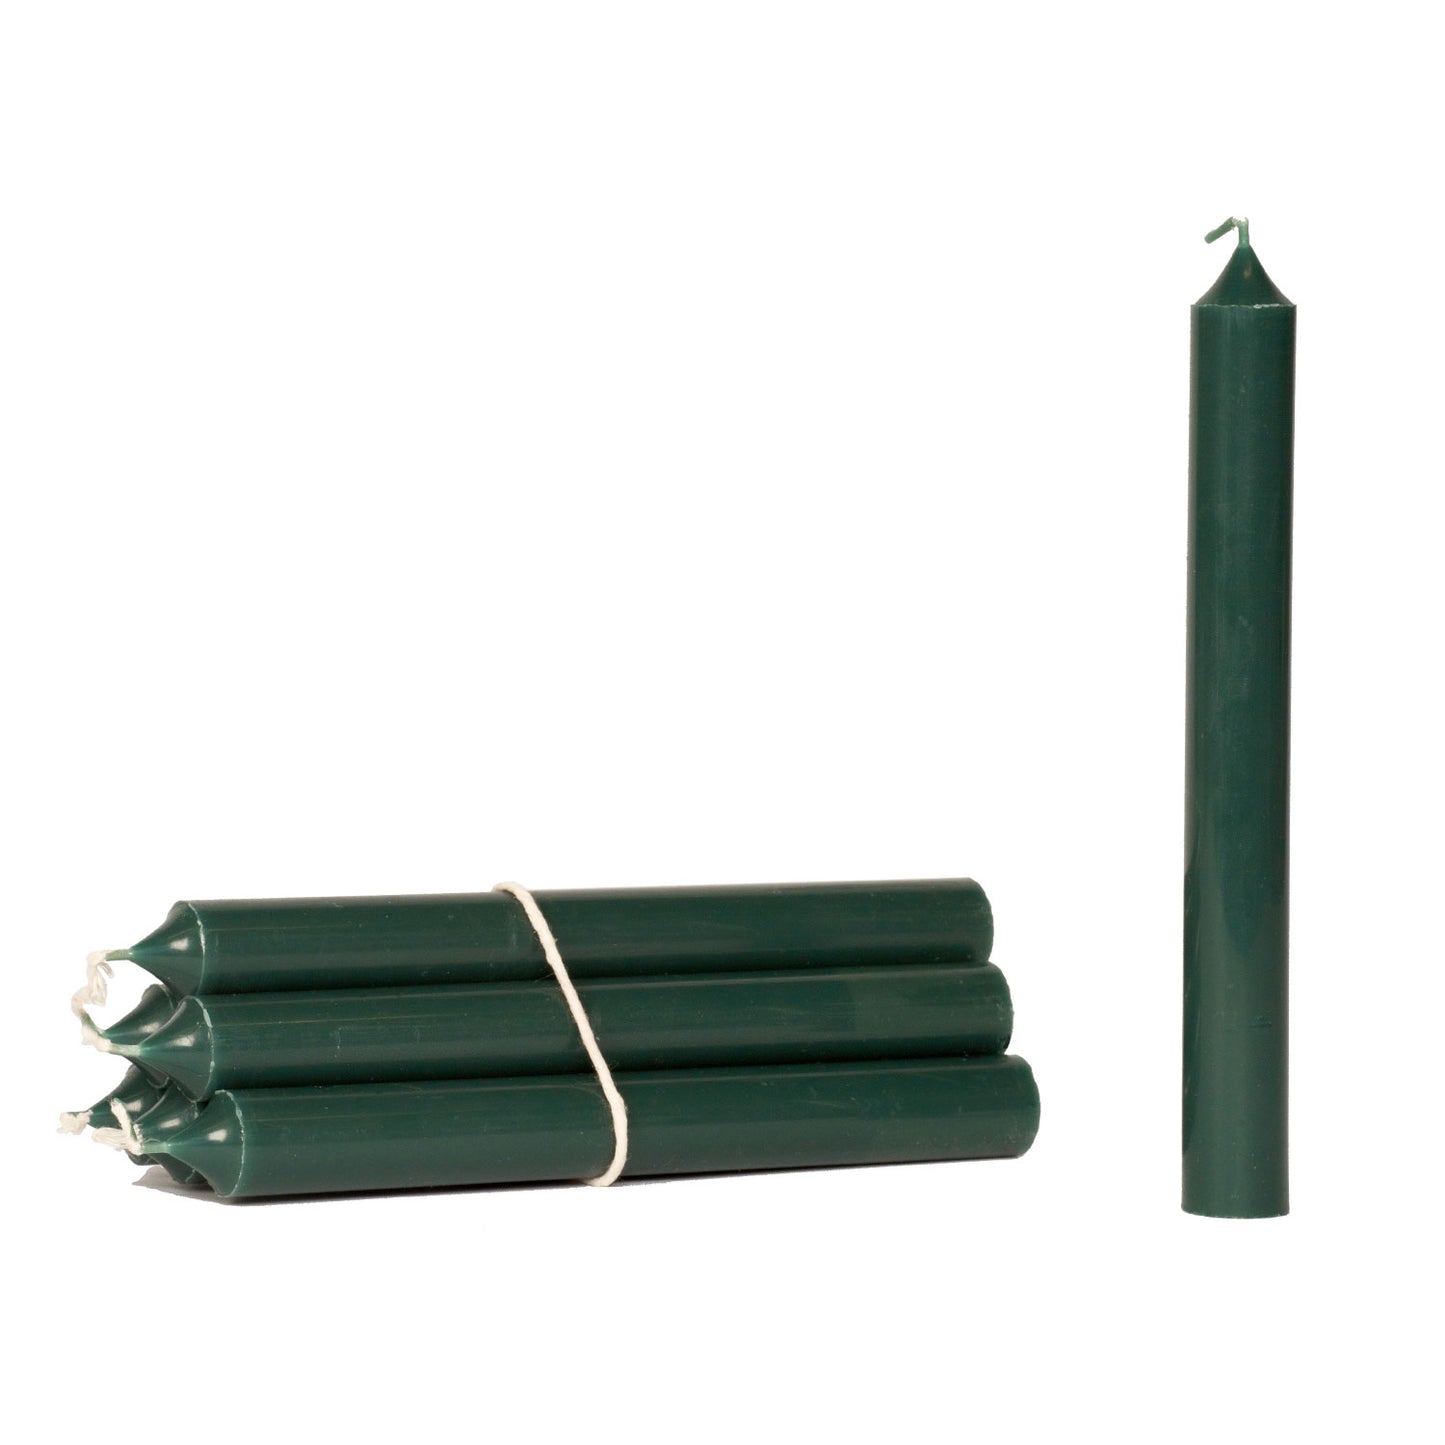 Vert Green Dinner Candle - pack of 12